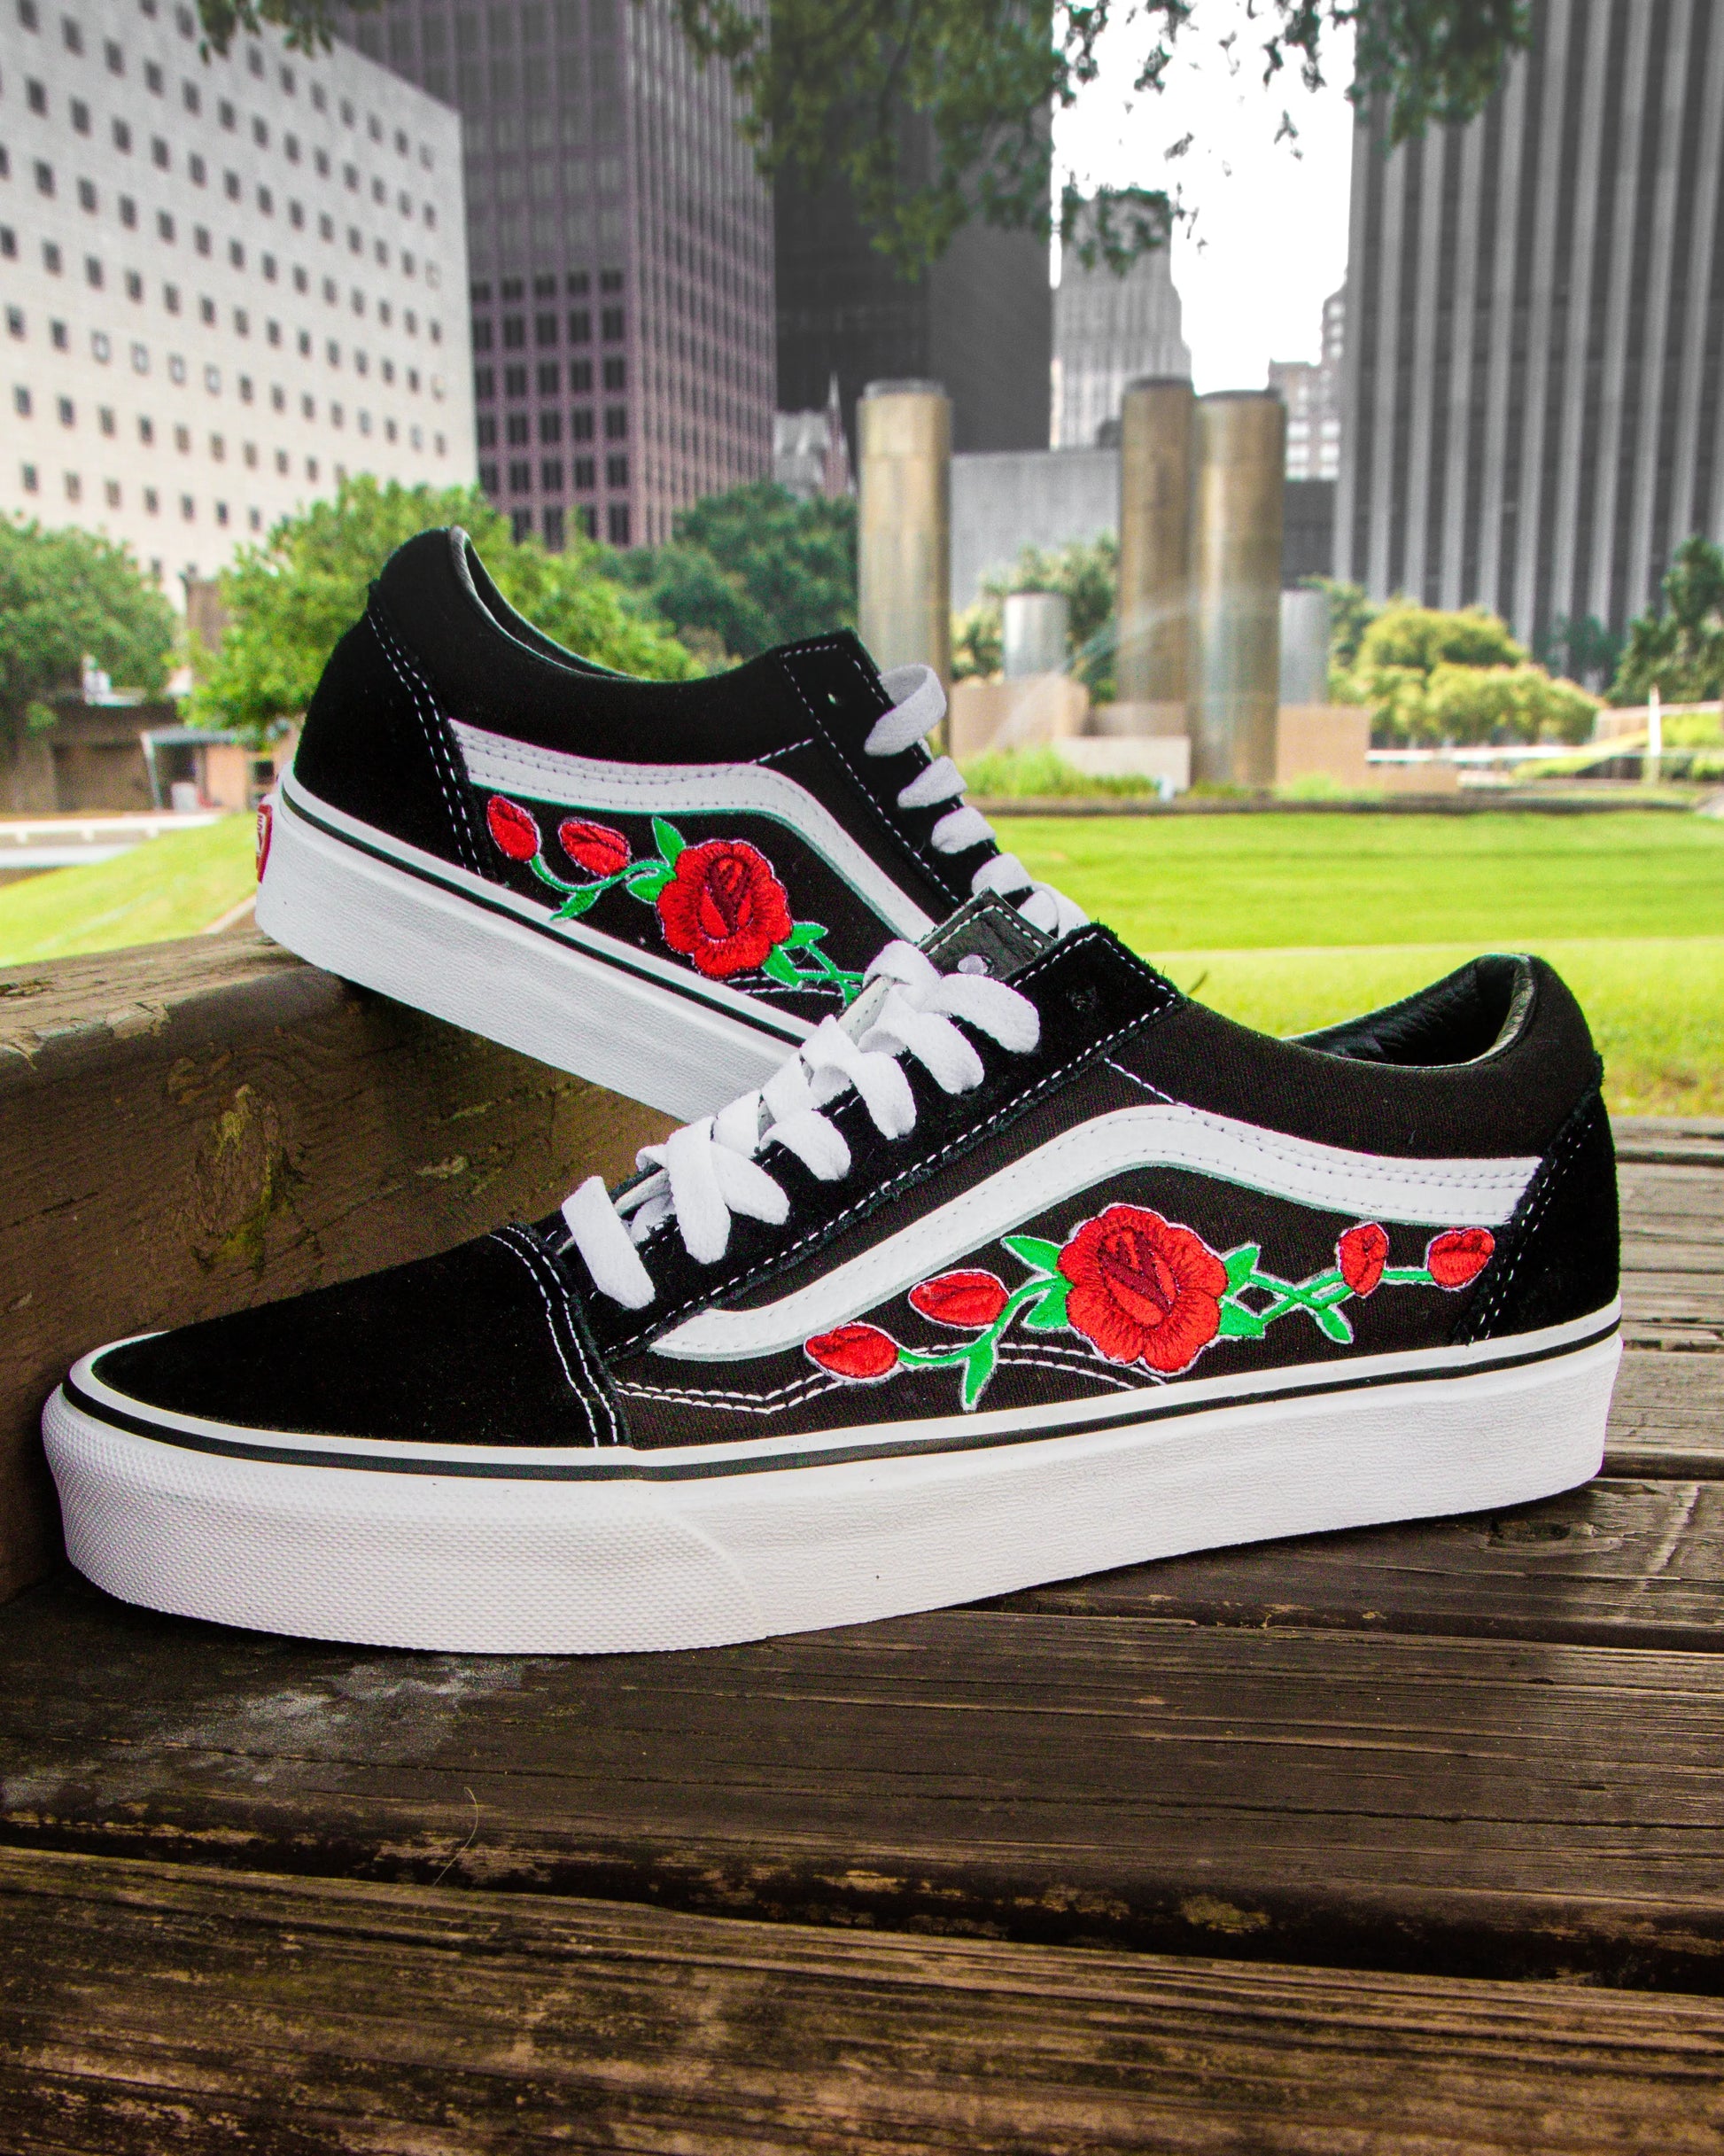 Old Skool Red Rose Custom Handmade Shoes Patch Collection